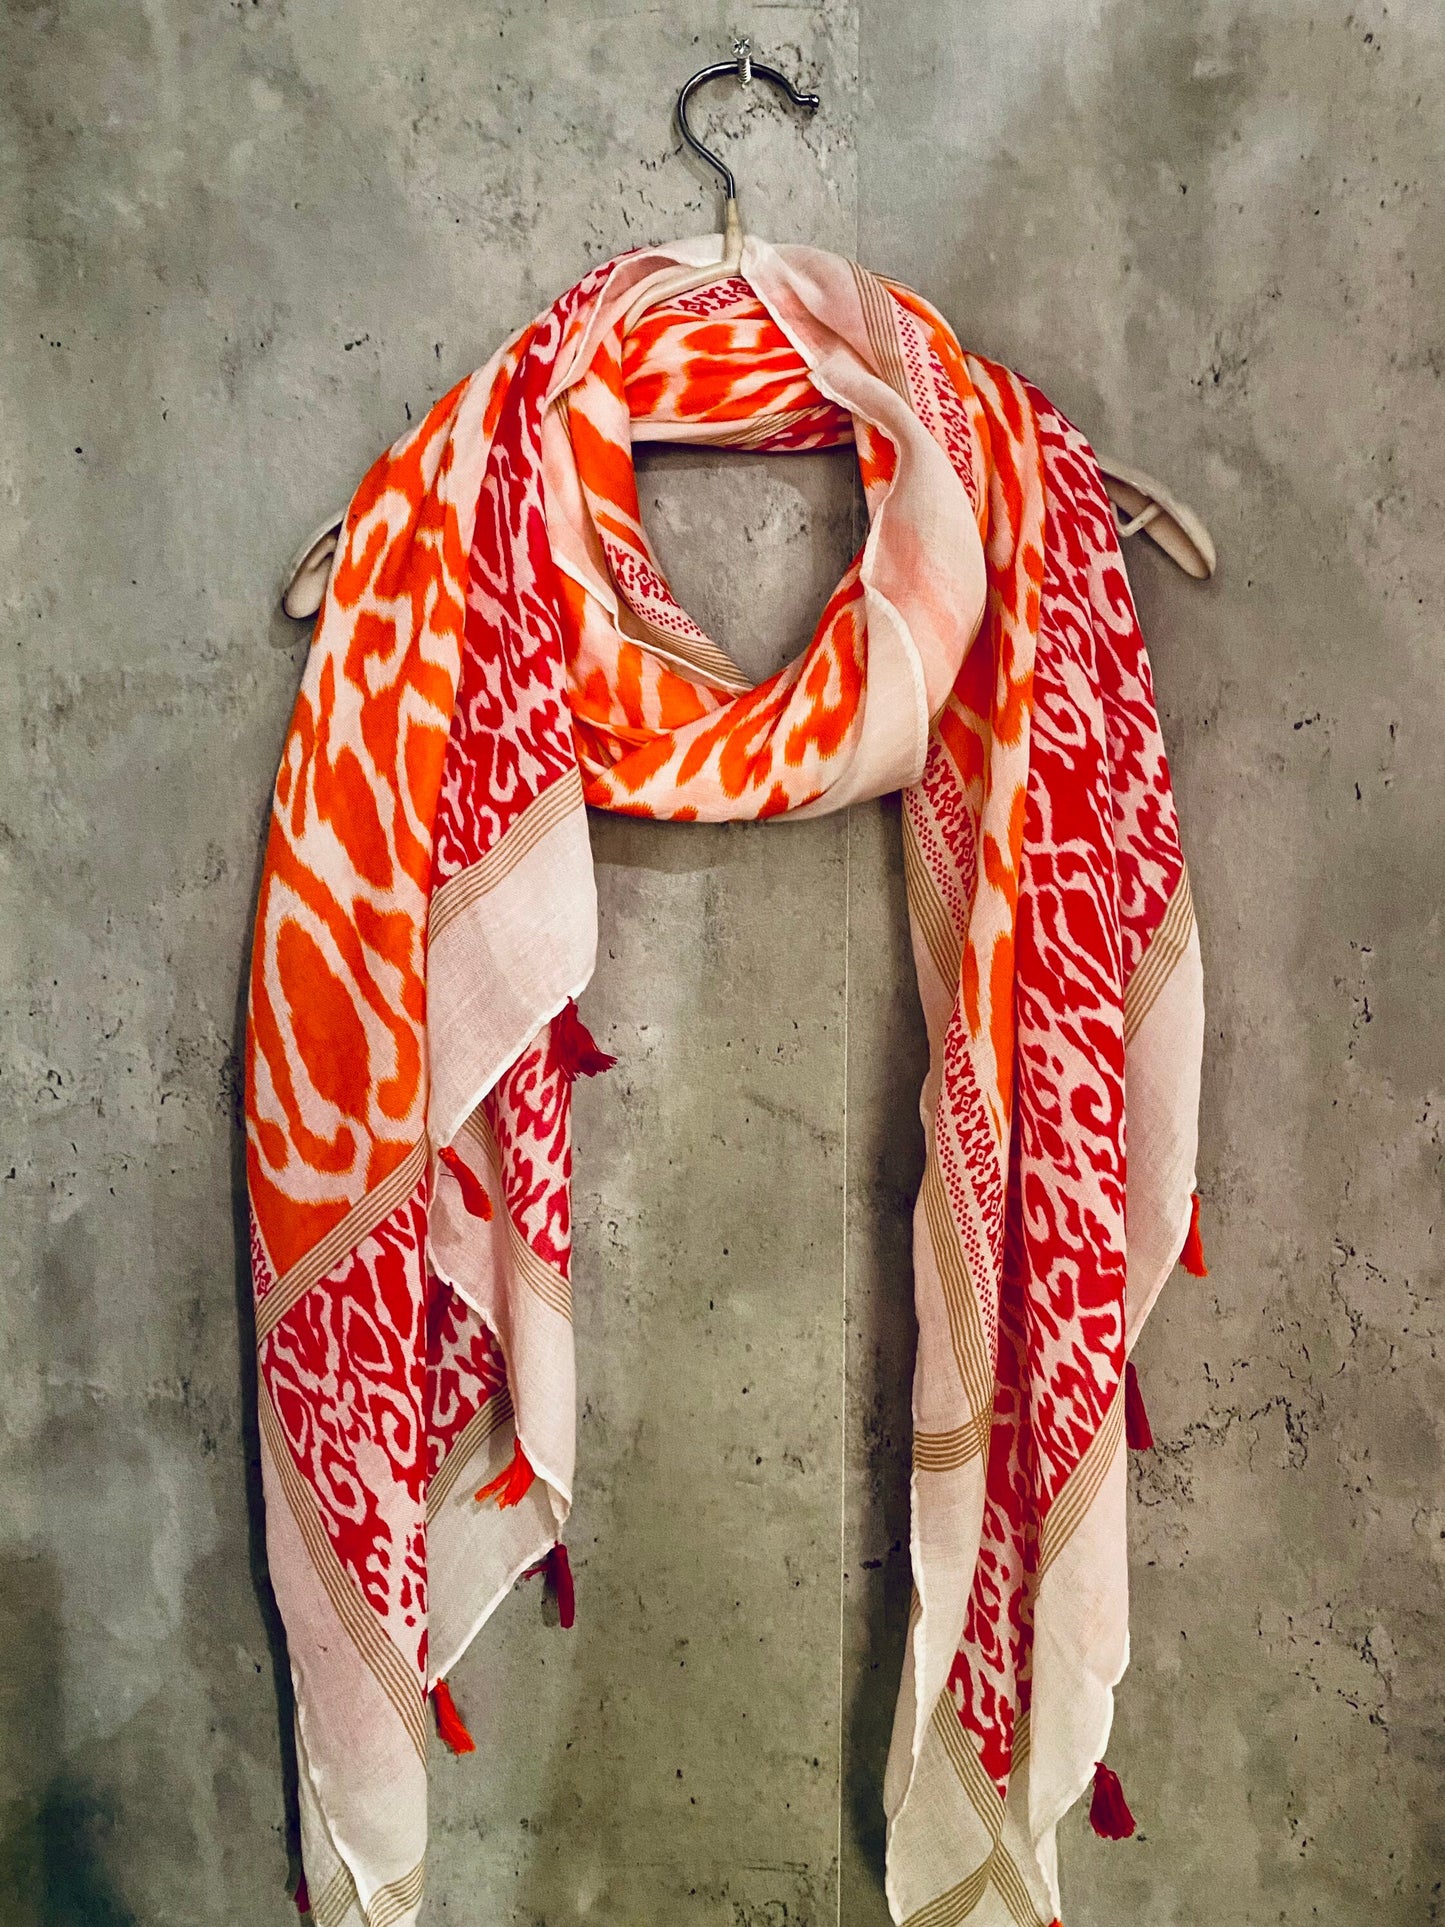 Bohemian Ikat Pattern with Tassels Orange Pink Cotton Scarf/Spring Summer Scarf/Scarf Women/UK Seller/Gifts For Her Birthday/Gifts For Mom